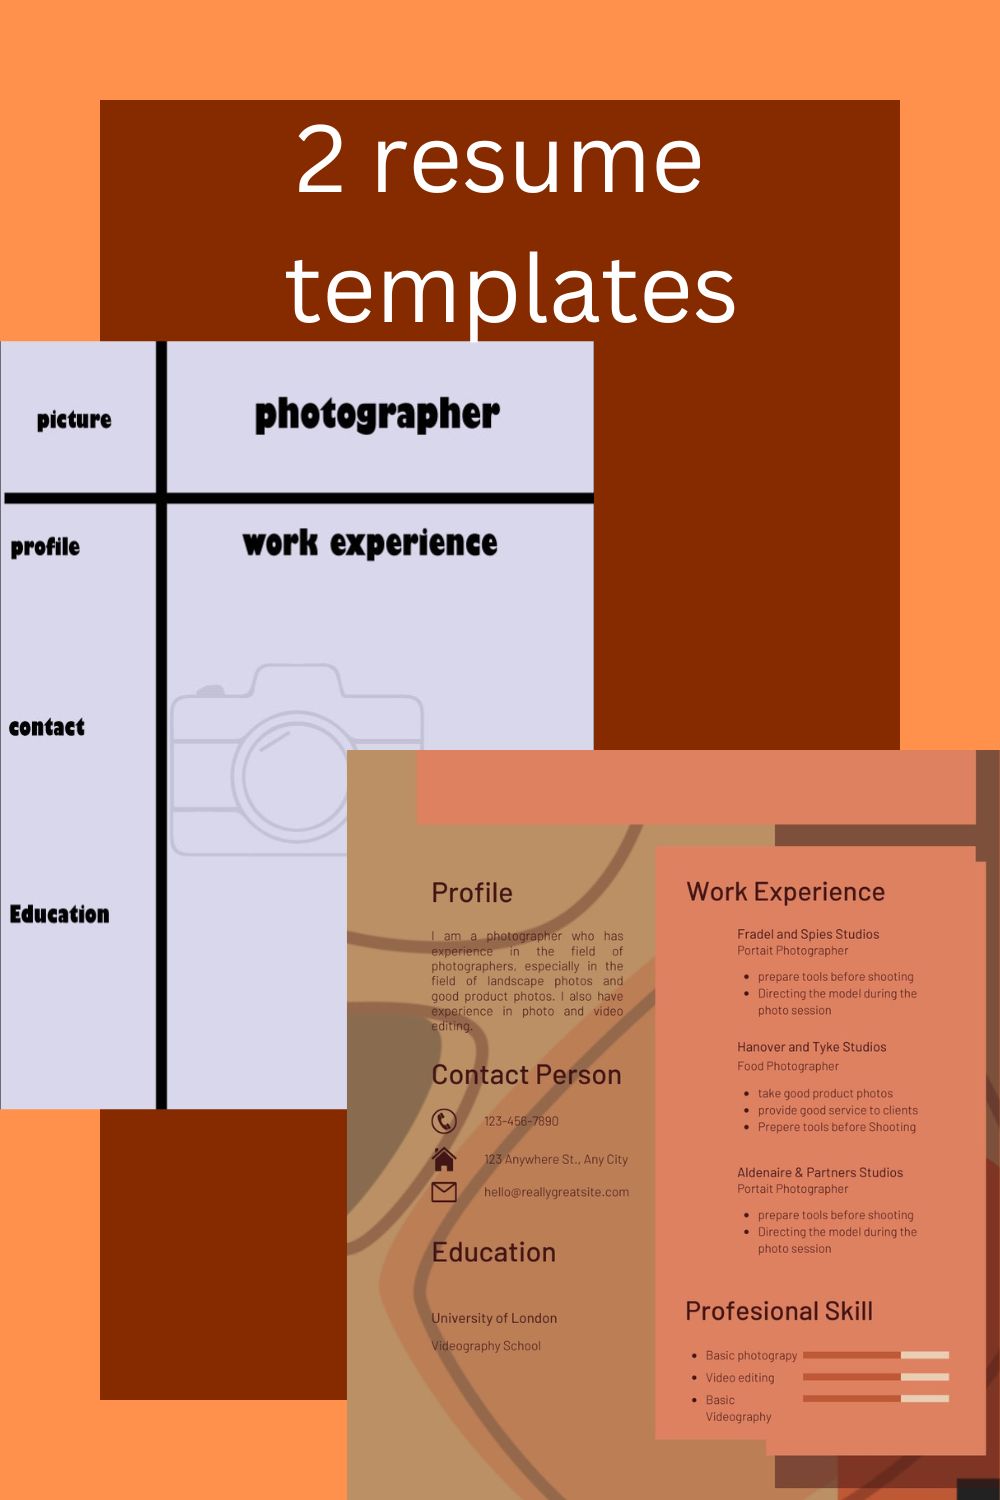 Photography Resume Template Pinterest image.